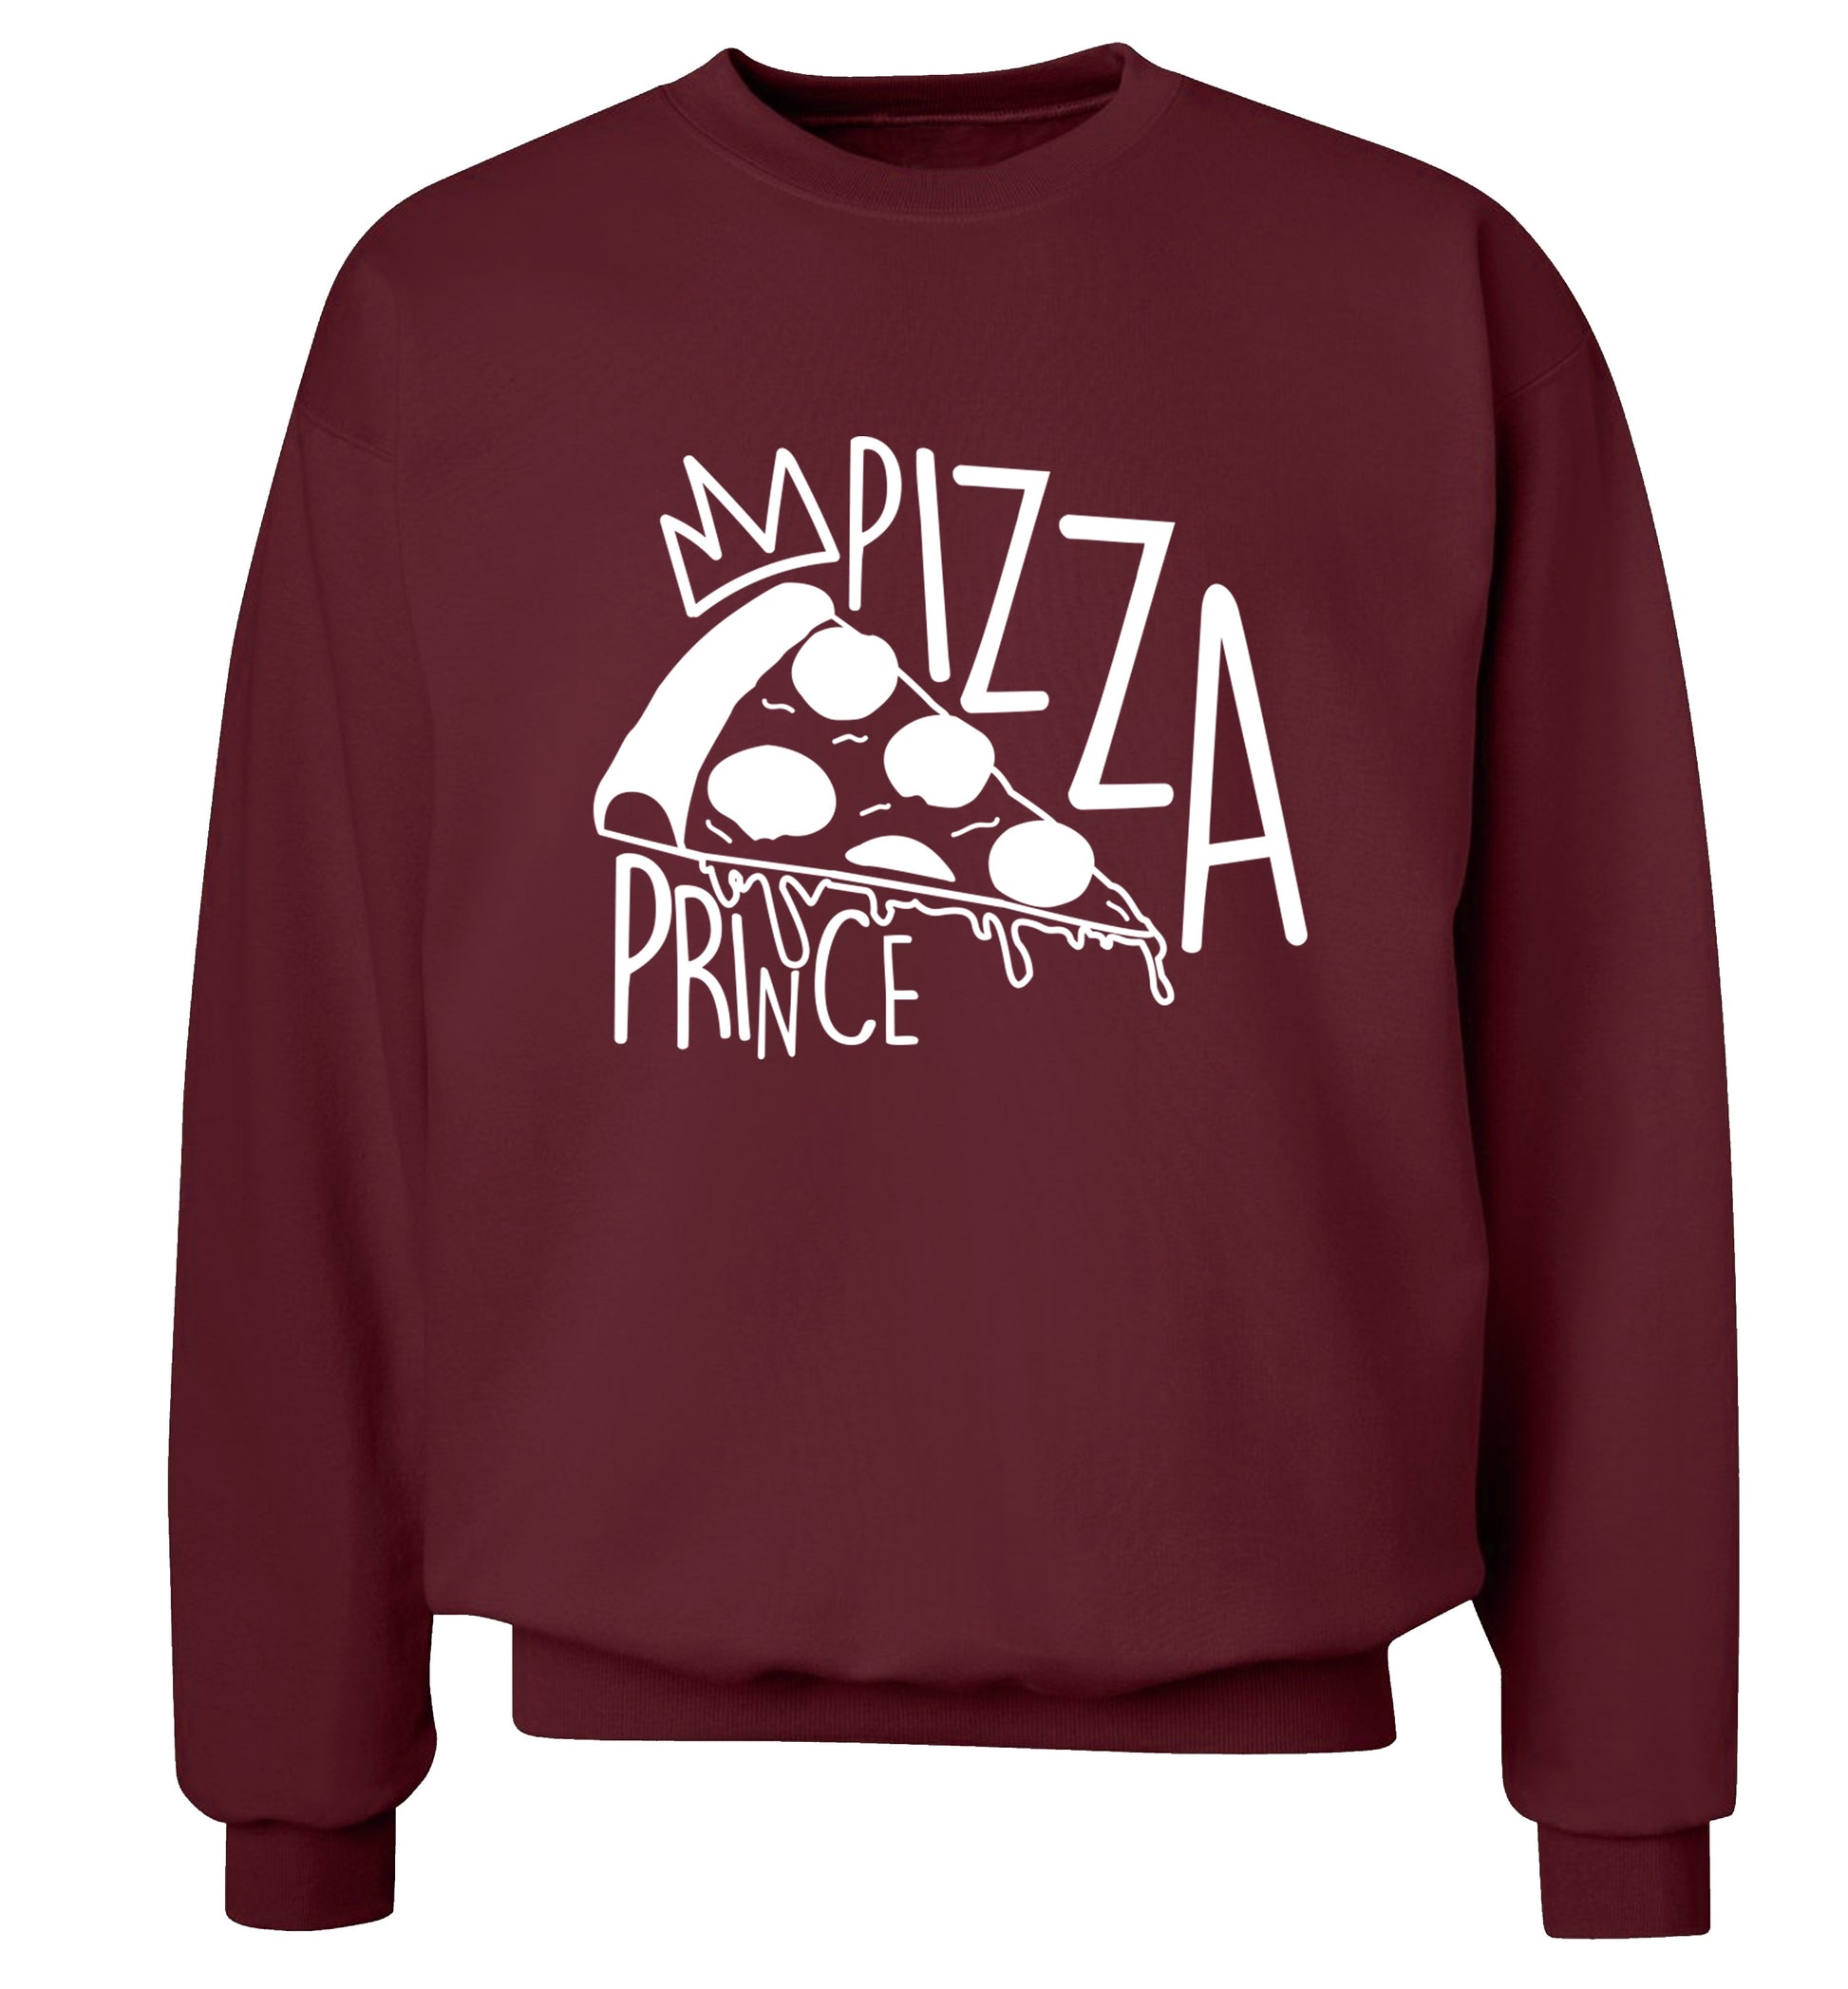 Pizza Prince Adult's unisex maroon Sweater 2XL